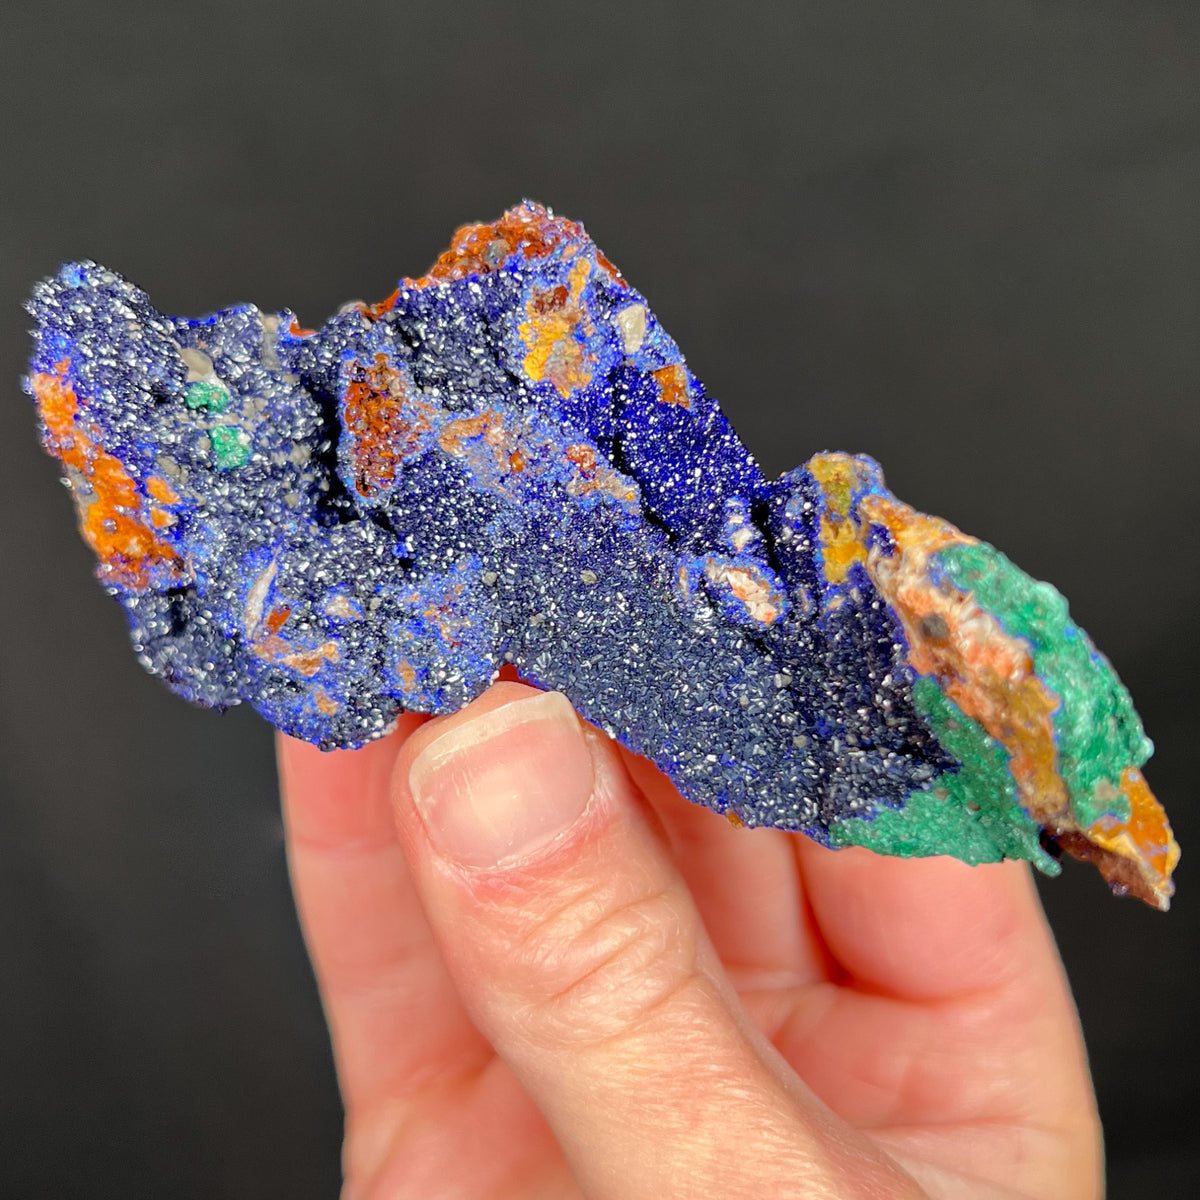 Sparkly Blue Azurite Crystals with Green Malachite